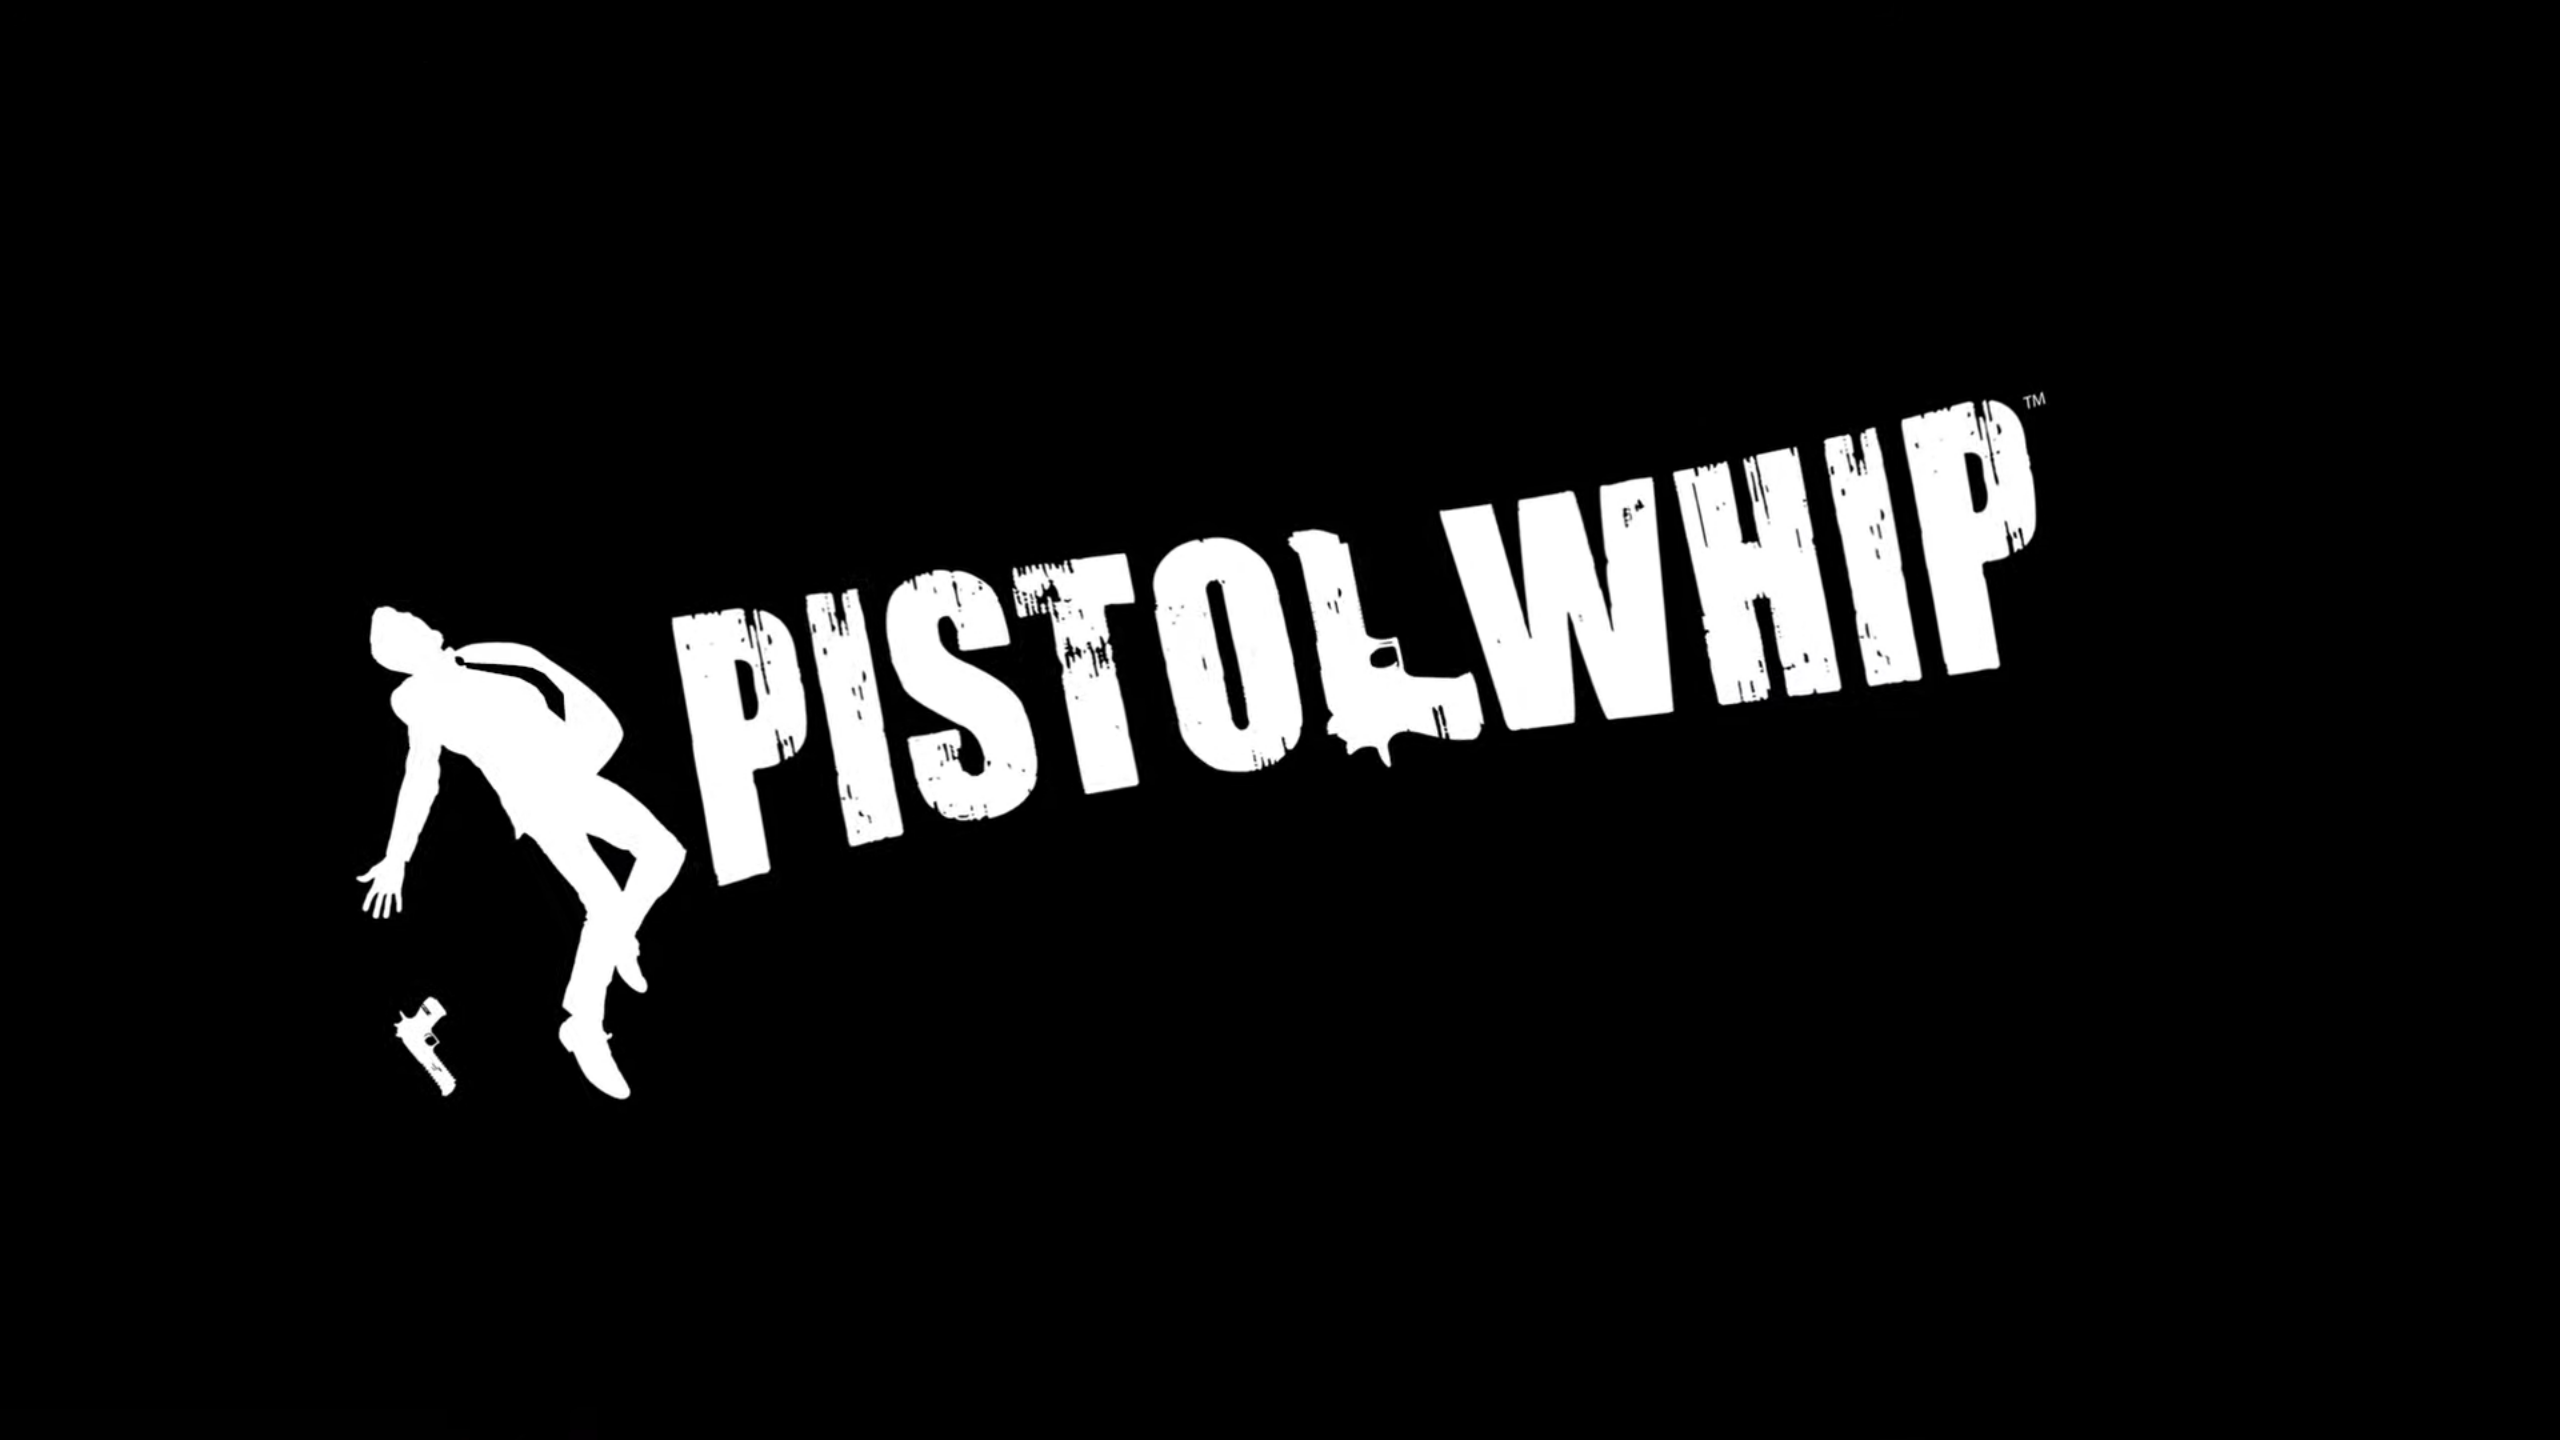 oculus quest pistol whip review